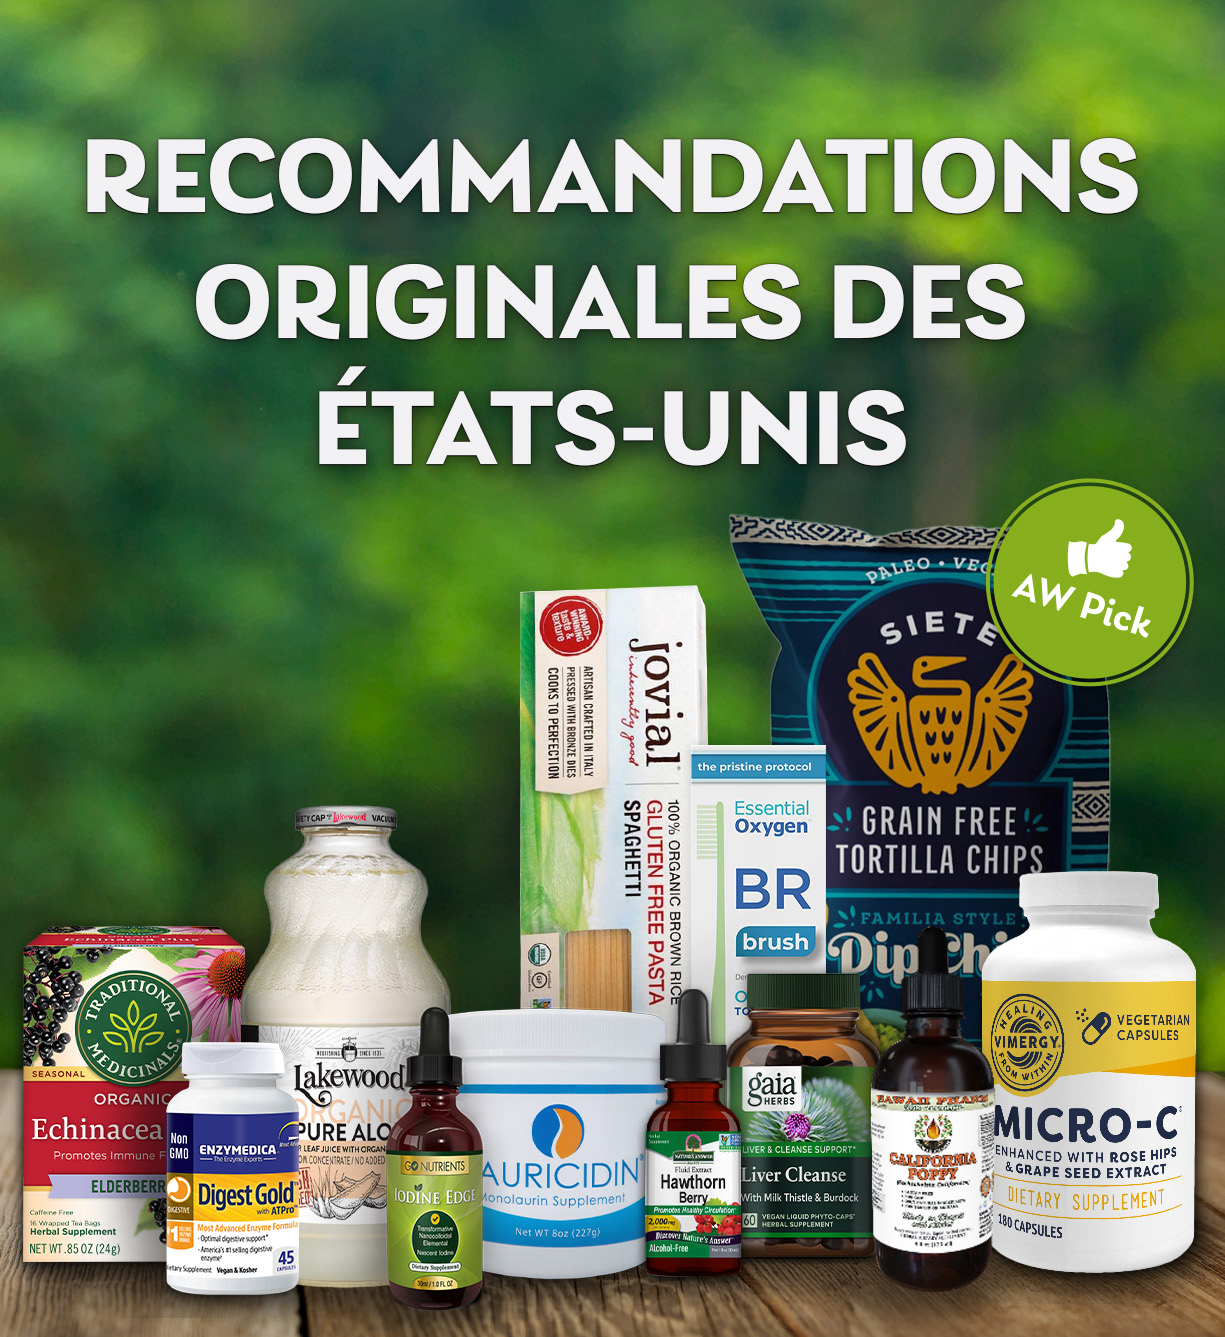 aw-pick-recommandations-mobil